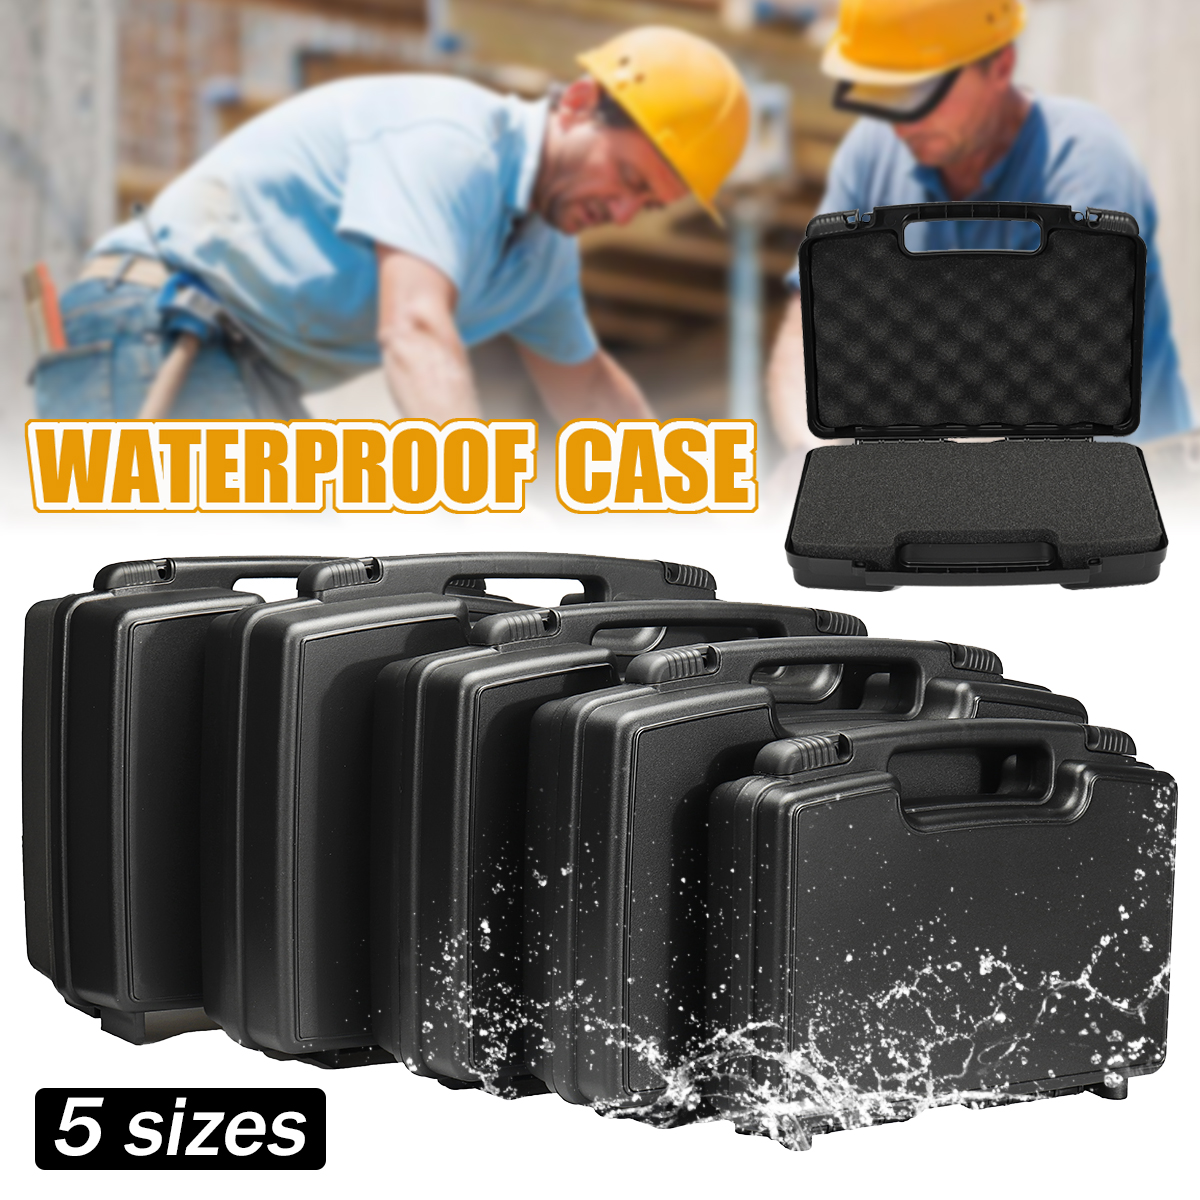 Waterproof-Hard-Carry-Tool-Case-Bag-Storage-Box-Camera-Photography-with-Foam-1791082-2